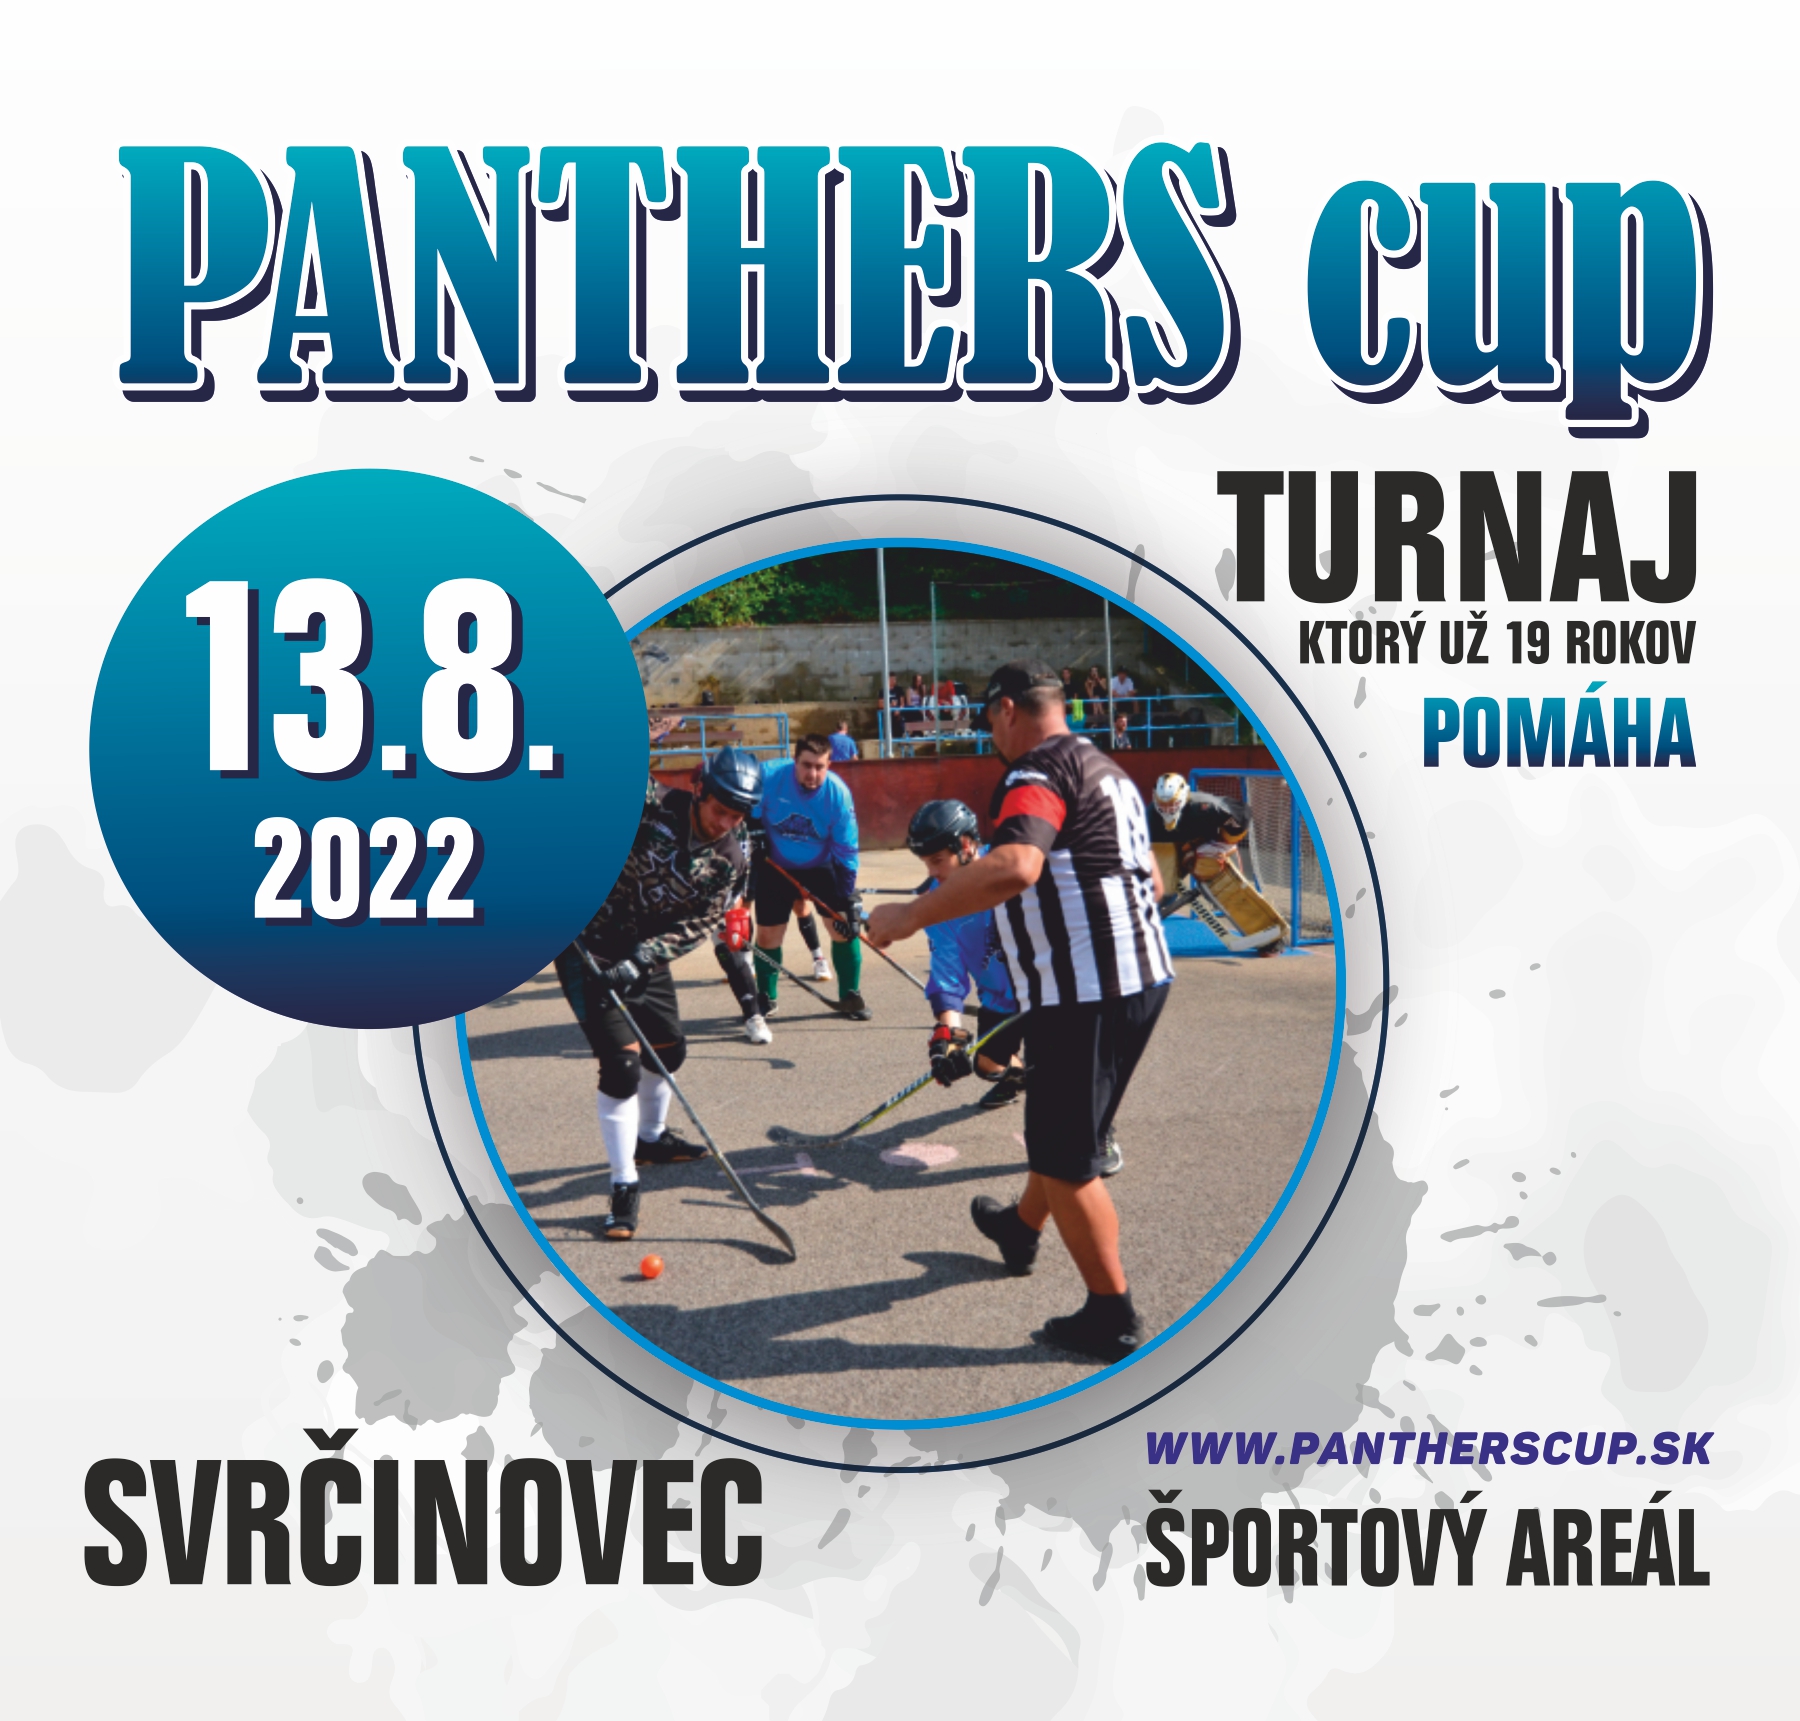 PANTHERS CUP